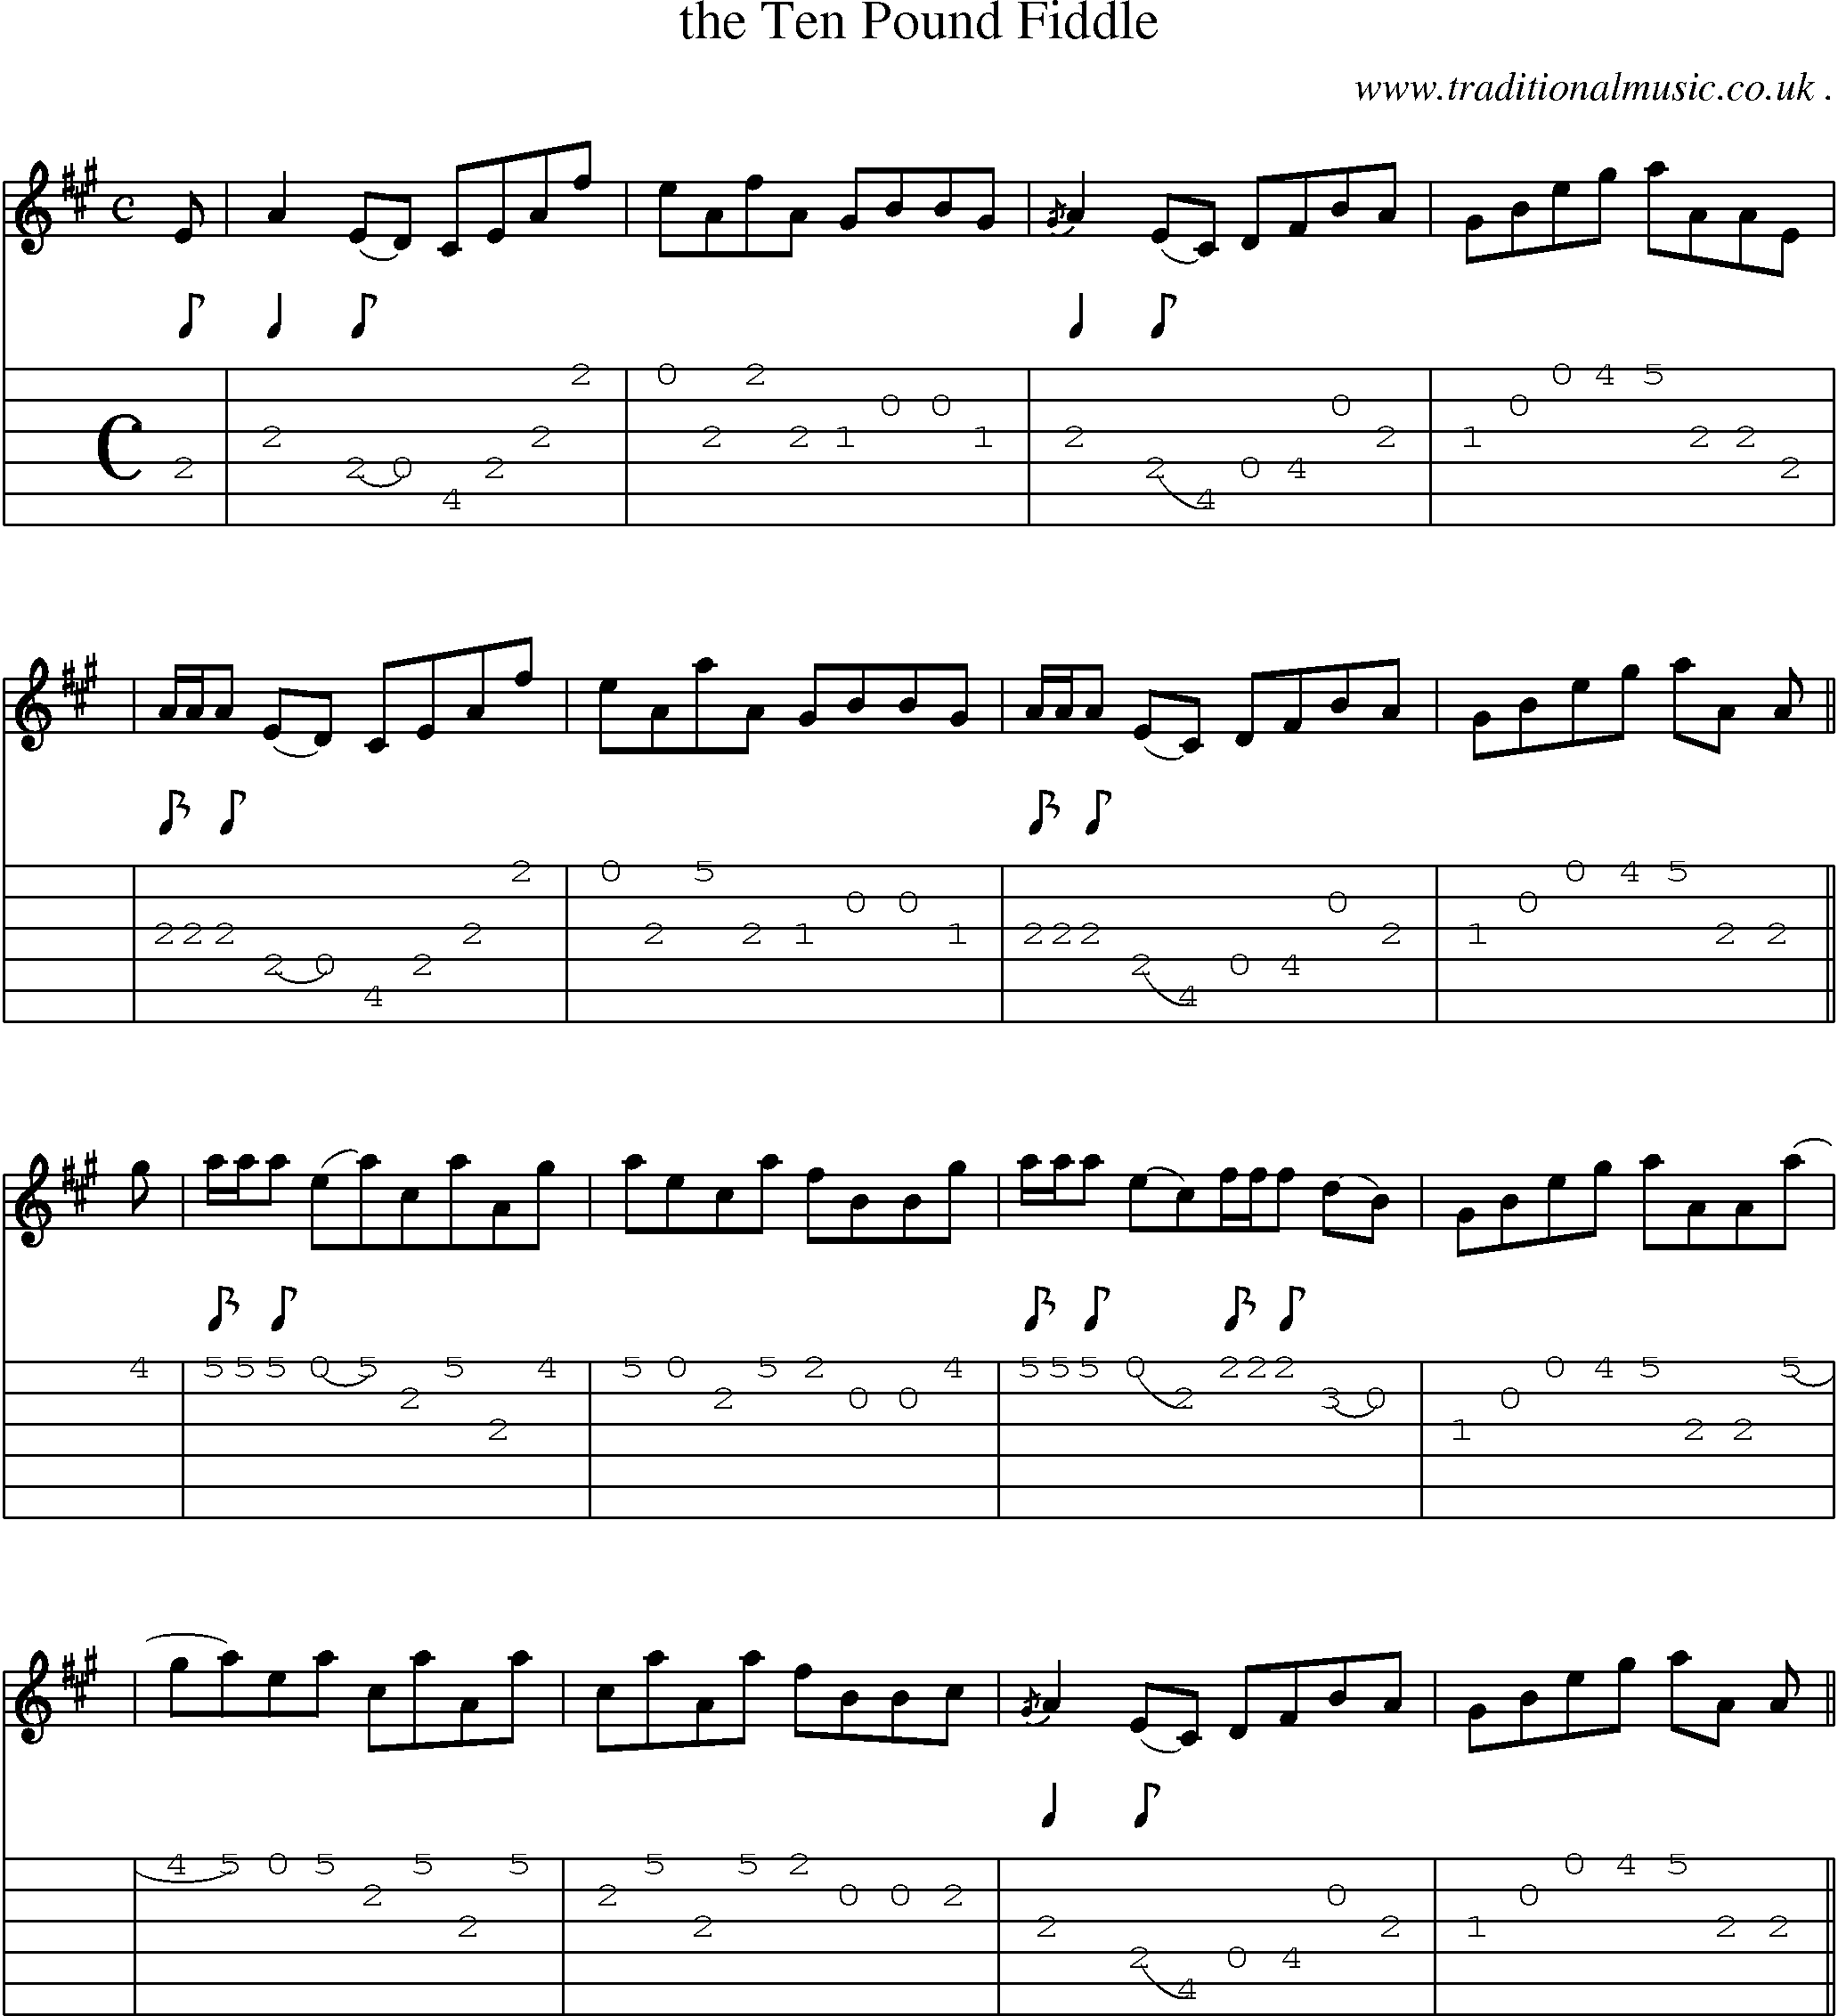 Sheet-music  score, Chords and Guitar Tabs for The Ten Pound Fiddle